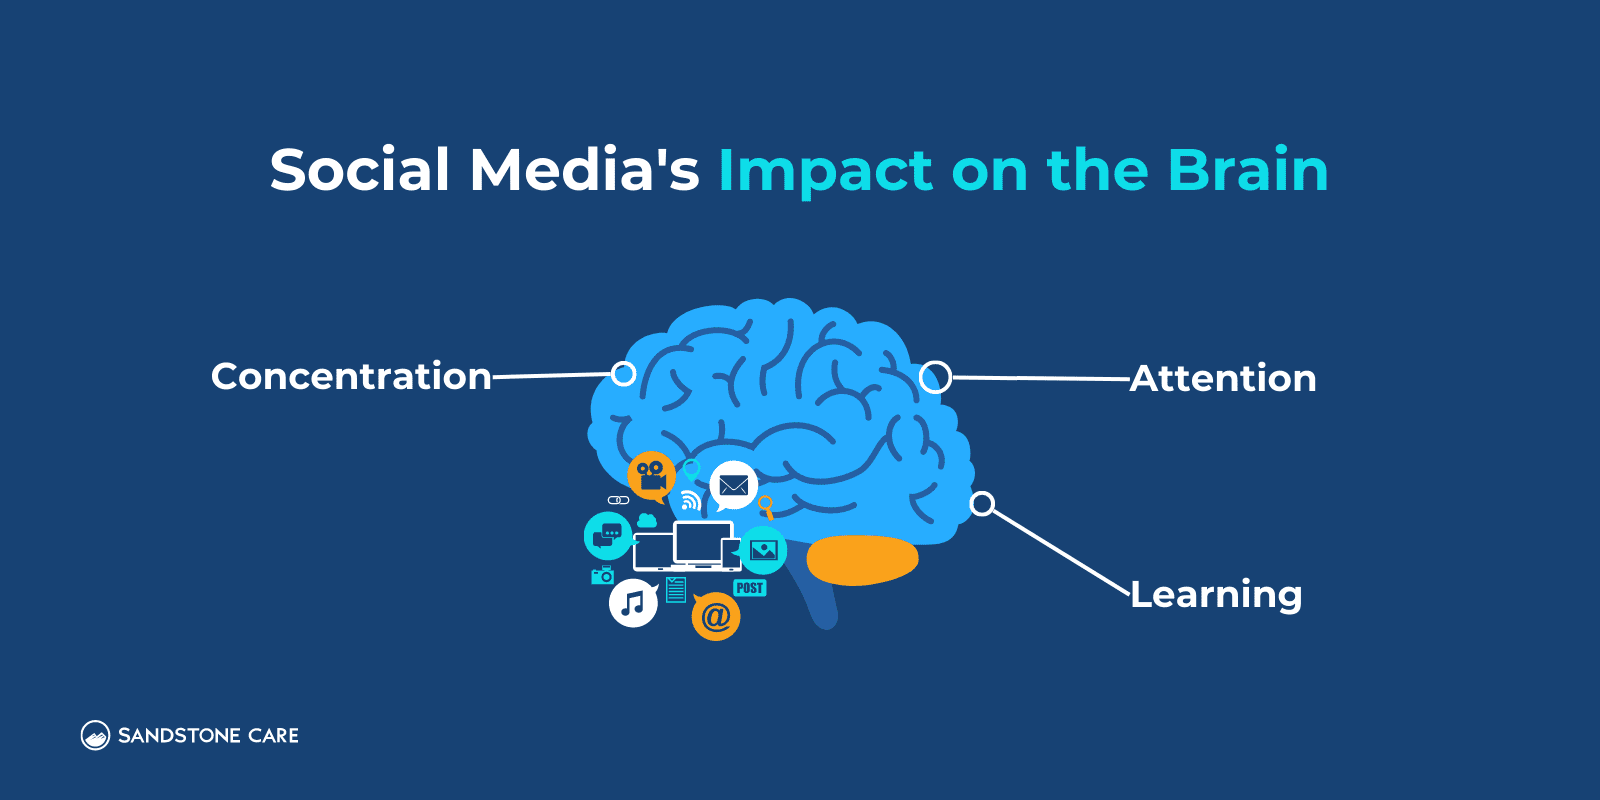 Social Media's Impact on the Brain illustrated by highlighting the areas of brain graphic with different brain functions that are impacted by social media